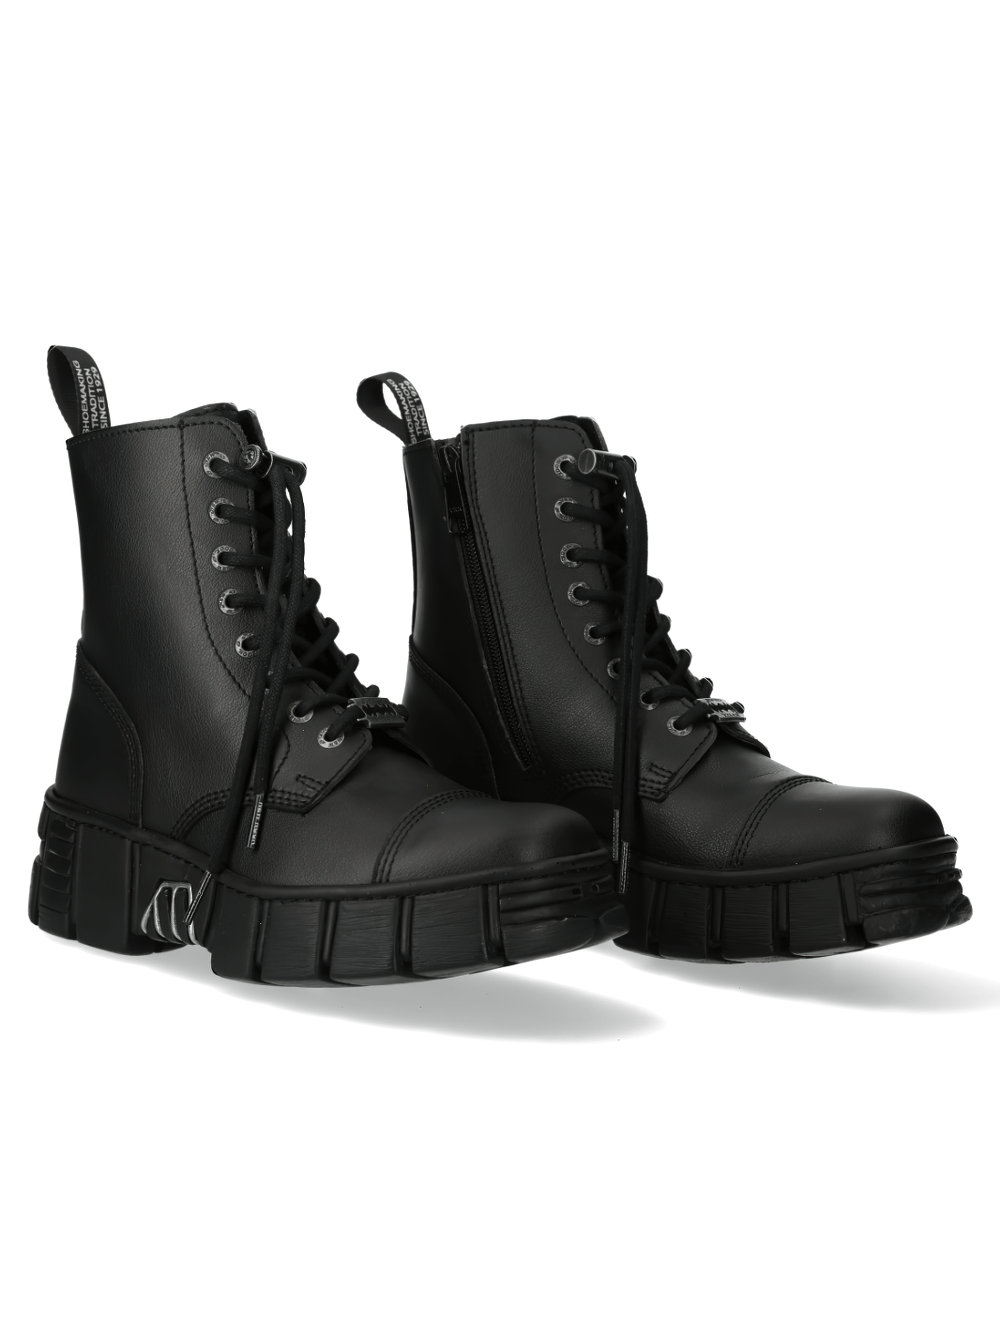 NEW ROCK Black Synthetic Military Ankle Boots with Laces